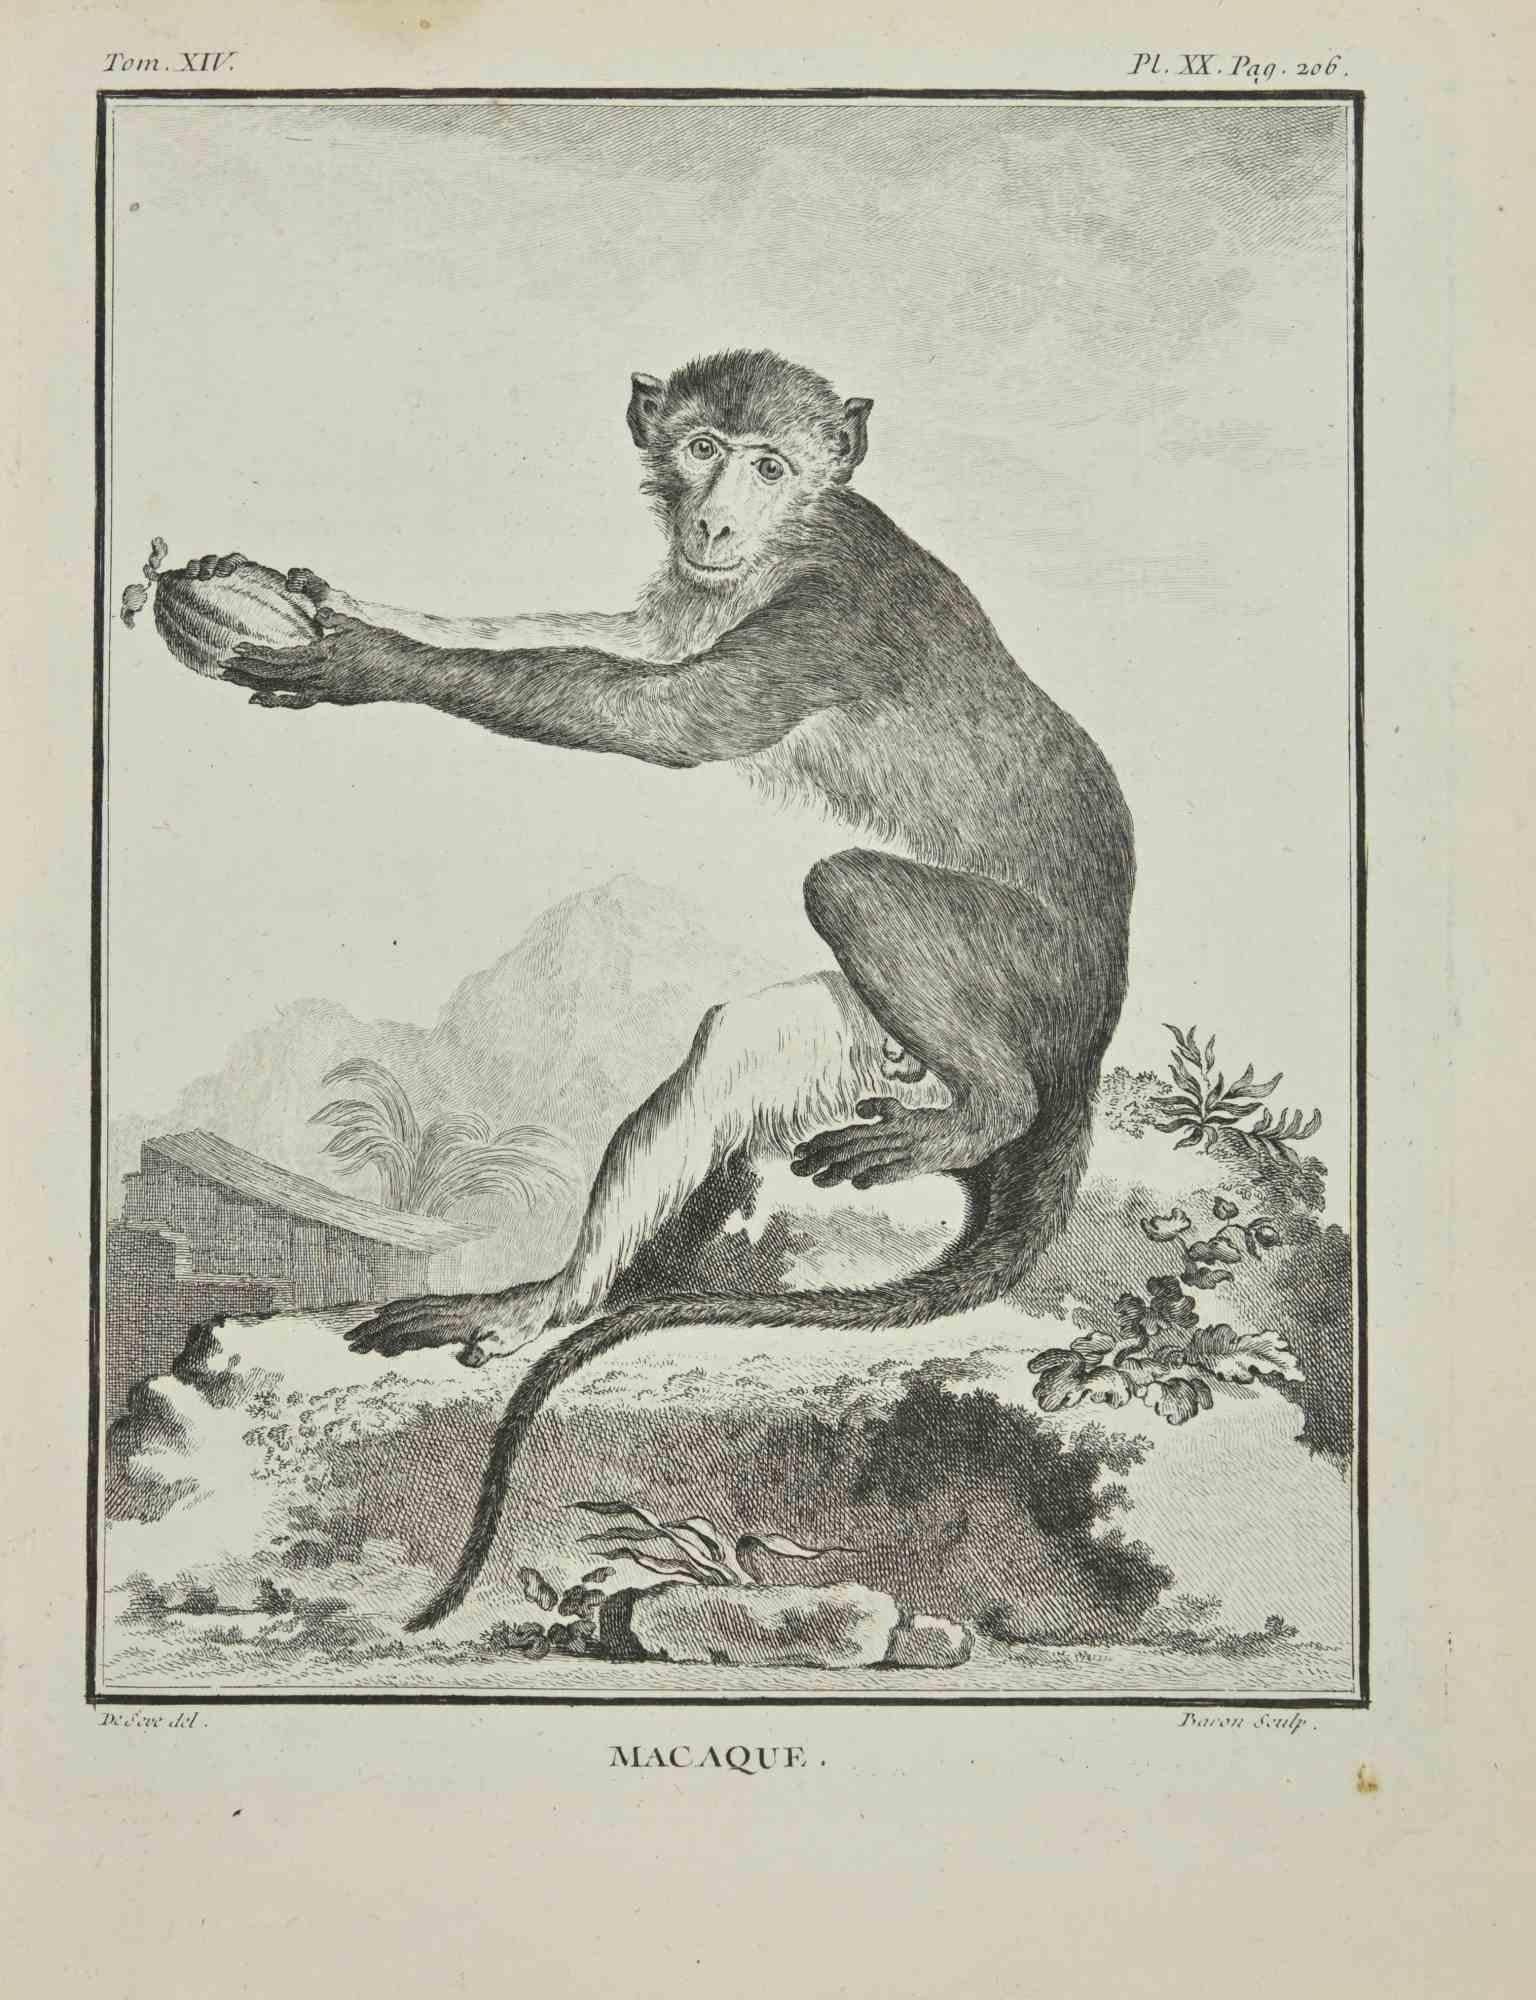 Macaque is an etching realized by Jacques Baron in 1771.

It belongs to the suite "Histoire Naturelle de Buffon".

The Artist's signature is engraved lower right.

Good conditions.